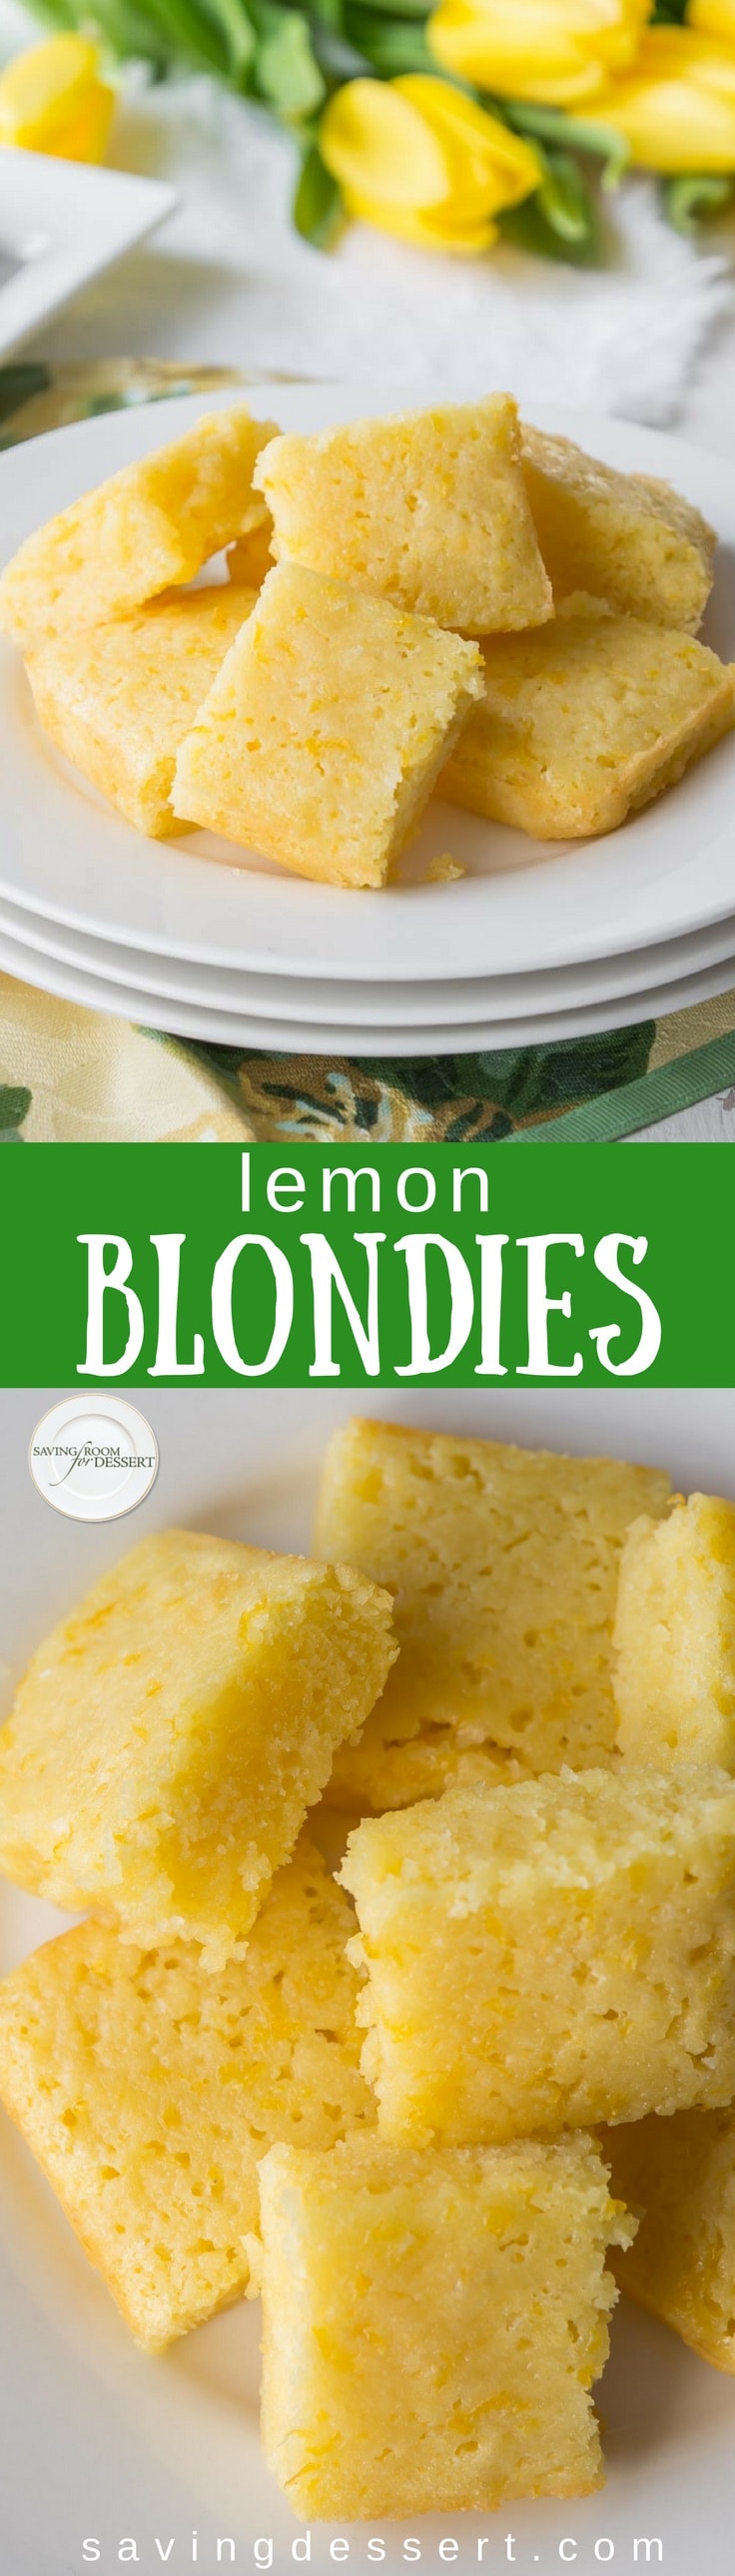 Tangy Lemon Blondies - a cross between a light and moist cake, and a sweet, tangy lemon bar. Super easy to make and even easier to eat! #savingroomfordessert #lemon #blondies #lemonblondies #lemoncake #dessert